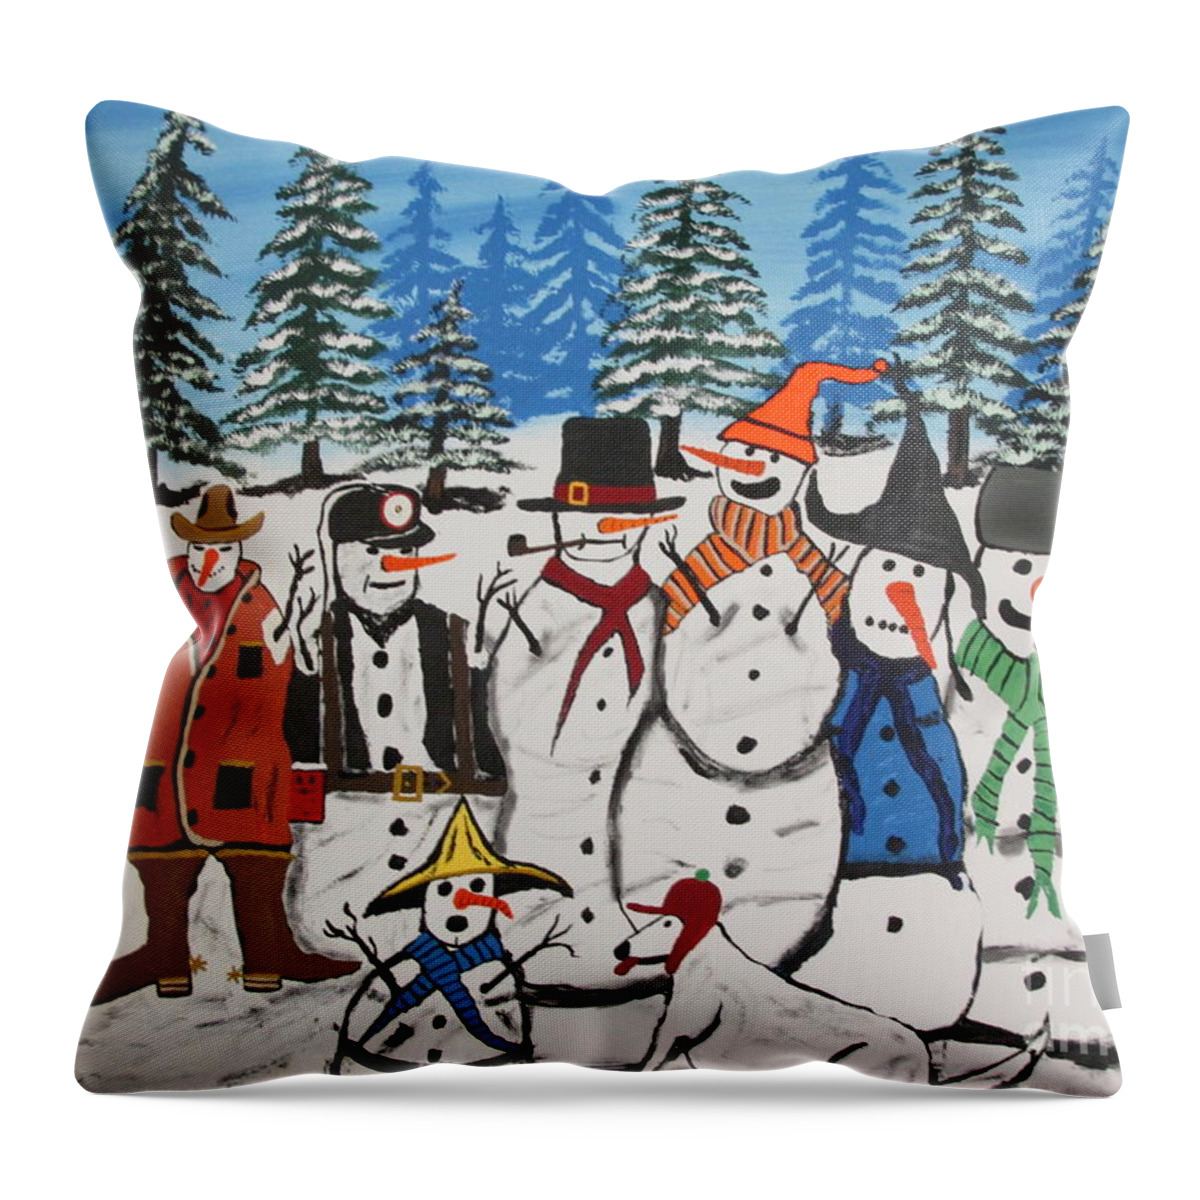  Throw Pillow featuring the painting 10 Christmas Snowmen by Jeffrey Koss